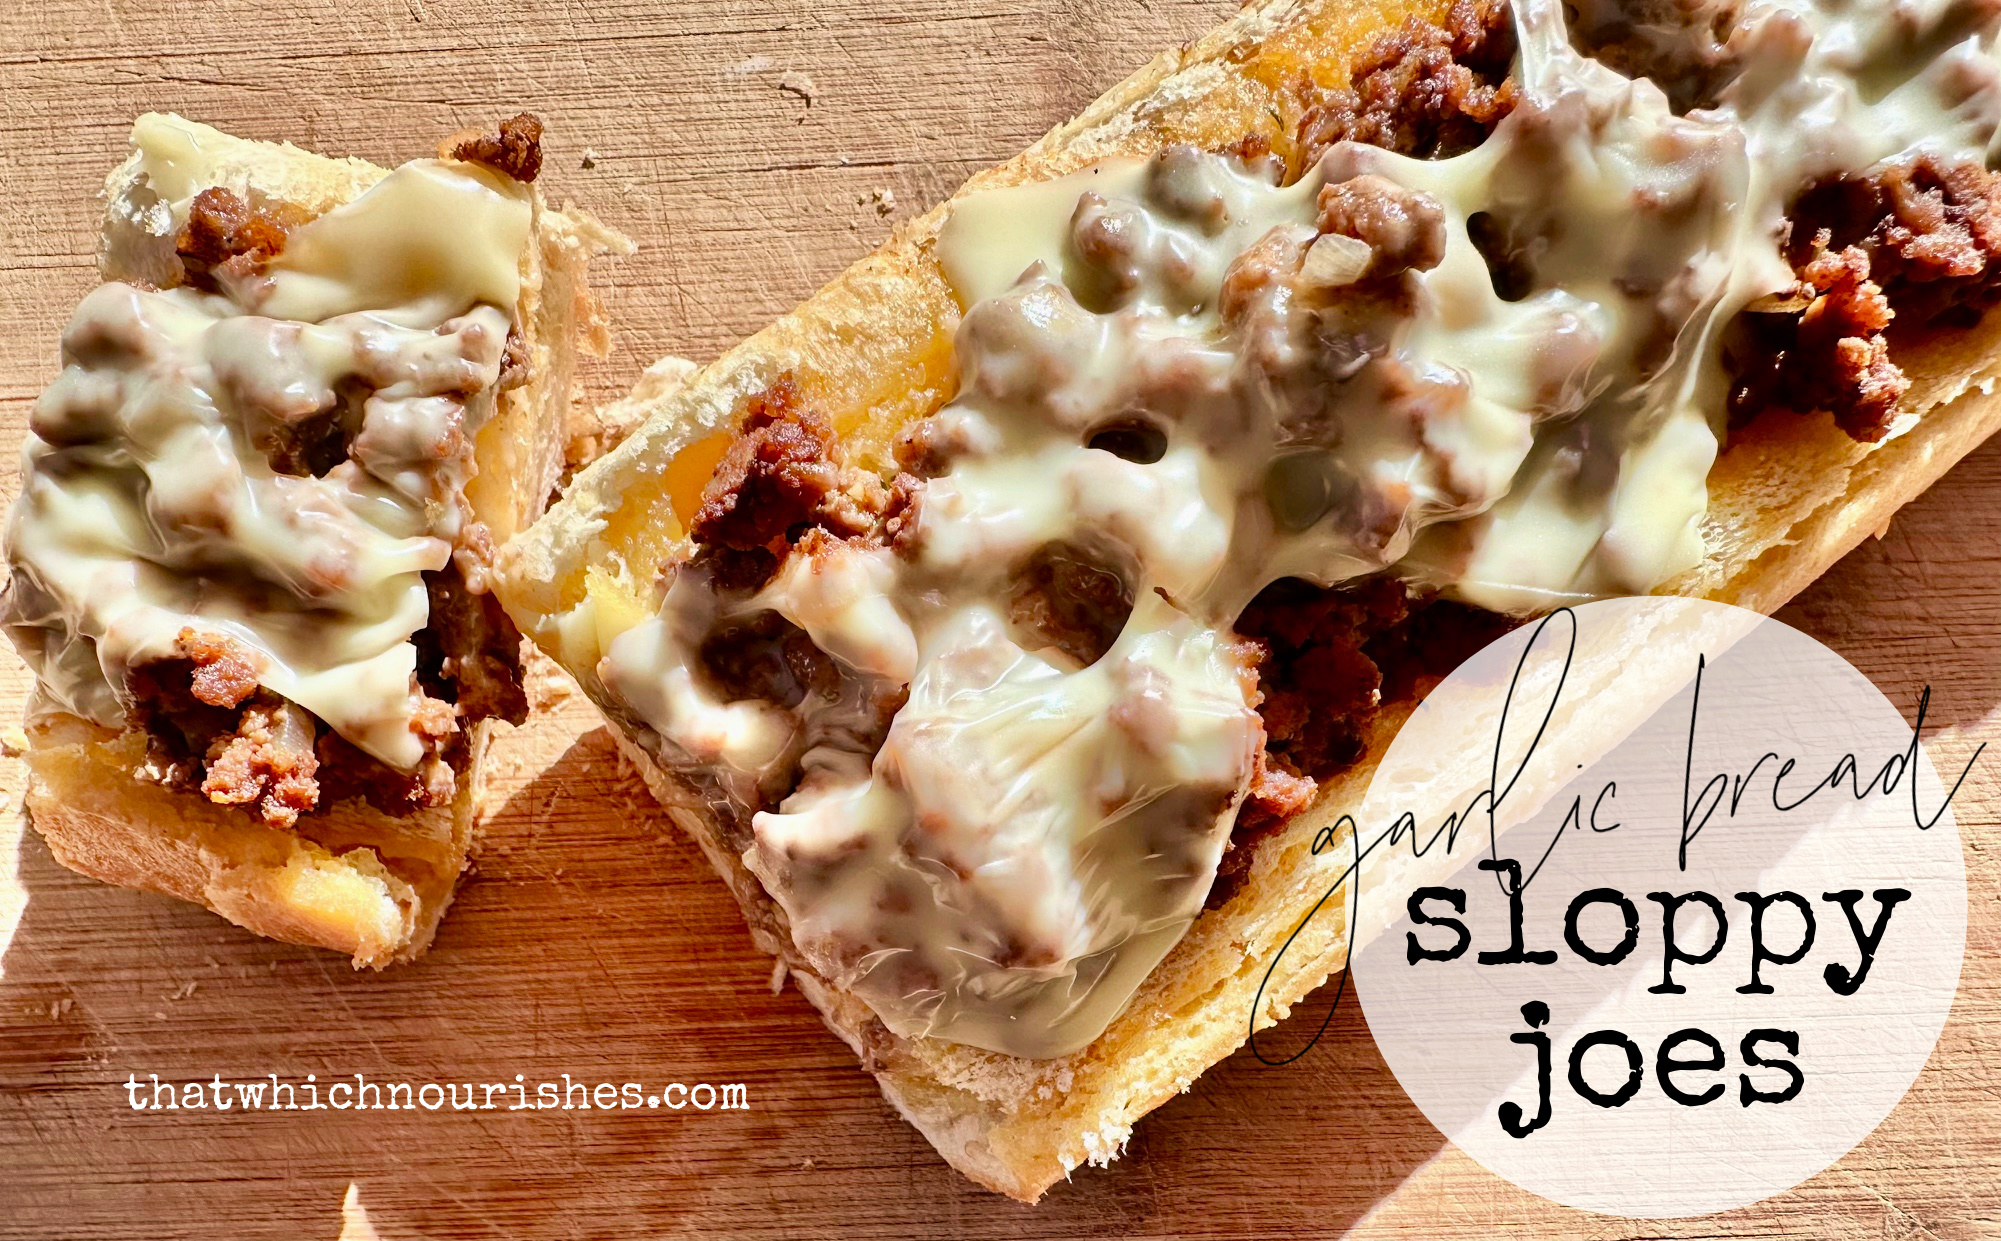 Garlic Bread Sloppy Joes -- Cheesy, garlicky, crunchy and satisfying, these take sloppy joes to a whole new taste and texture level of yum! | thatwhichnourishes.com